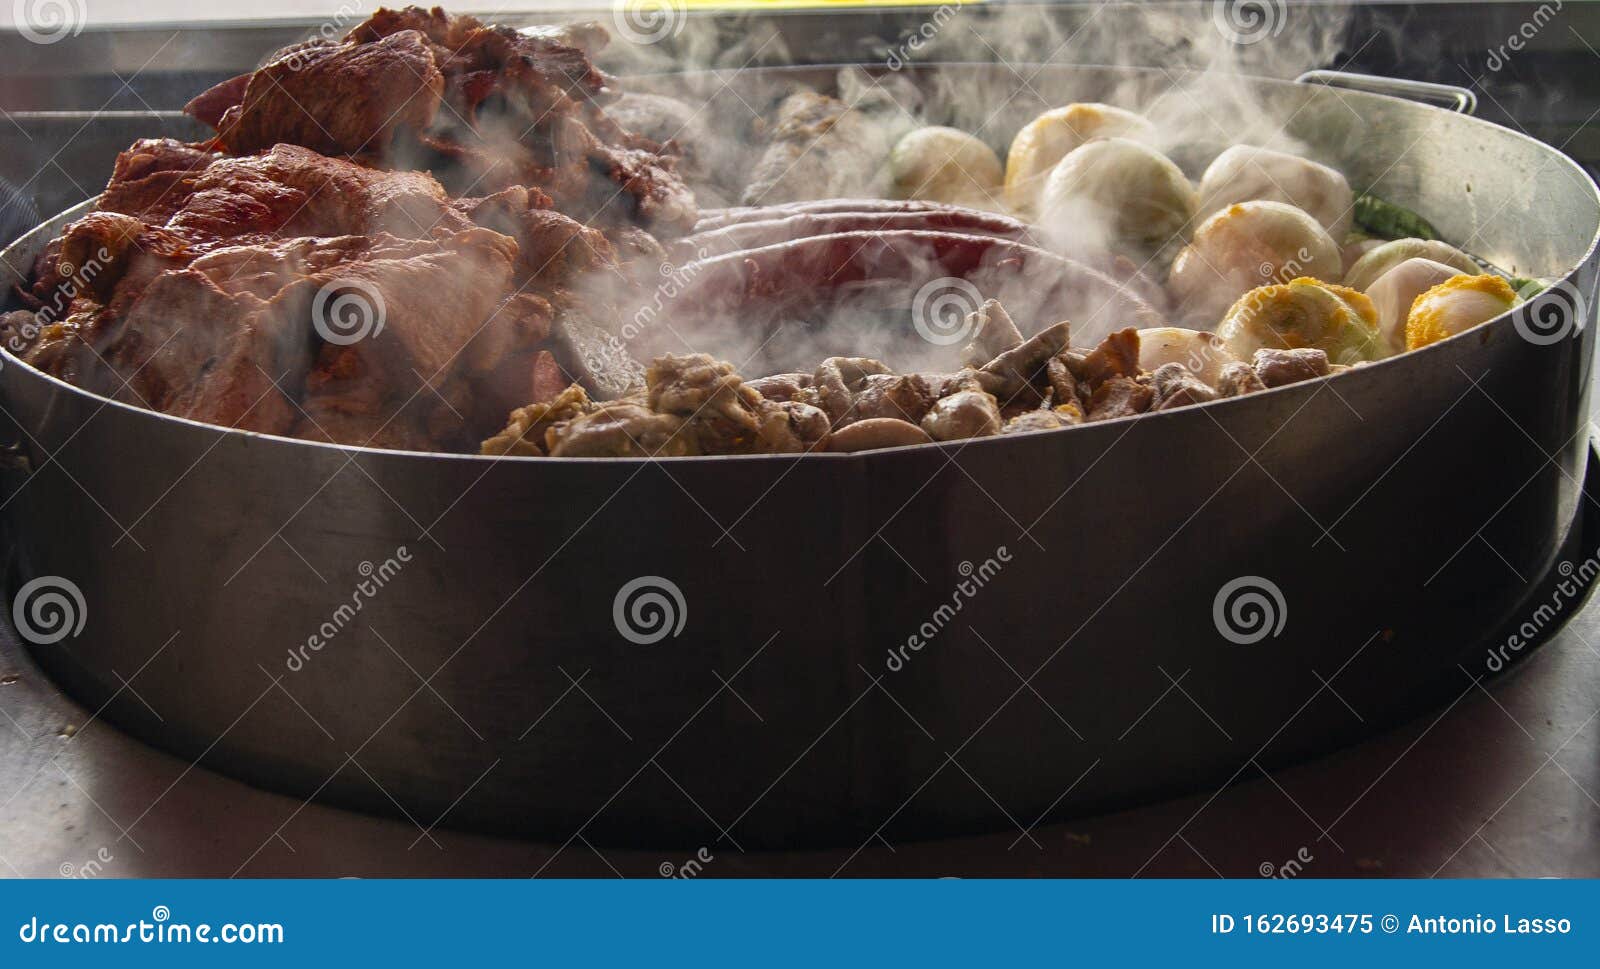 some types of meats and vegetables being coocked on a grill of a reustarant.